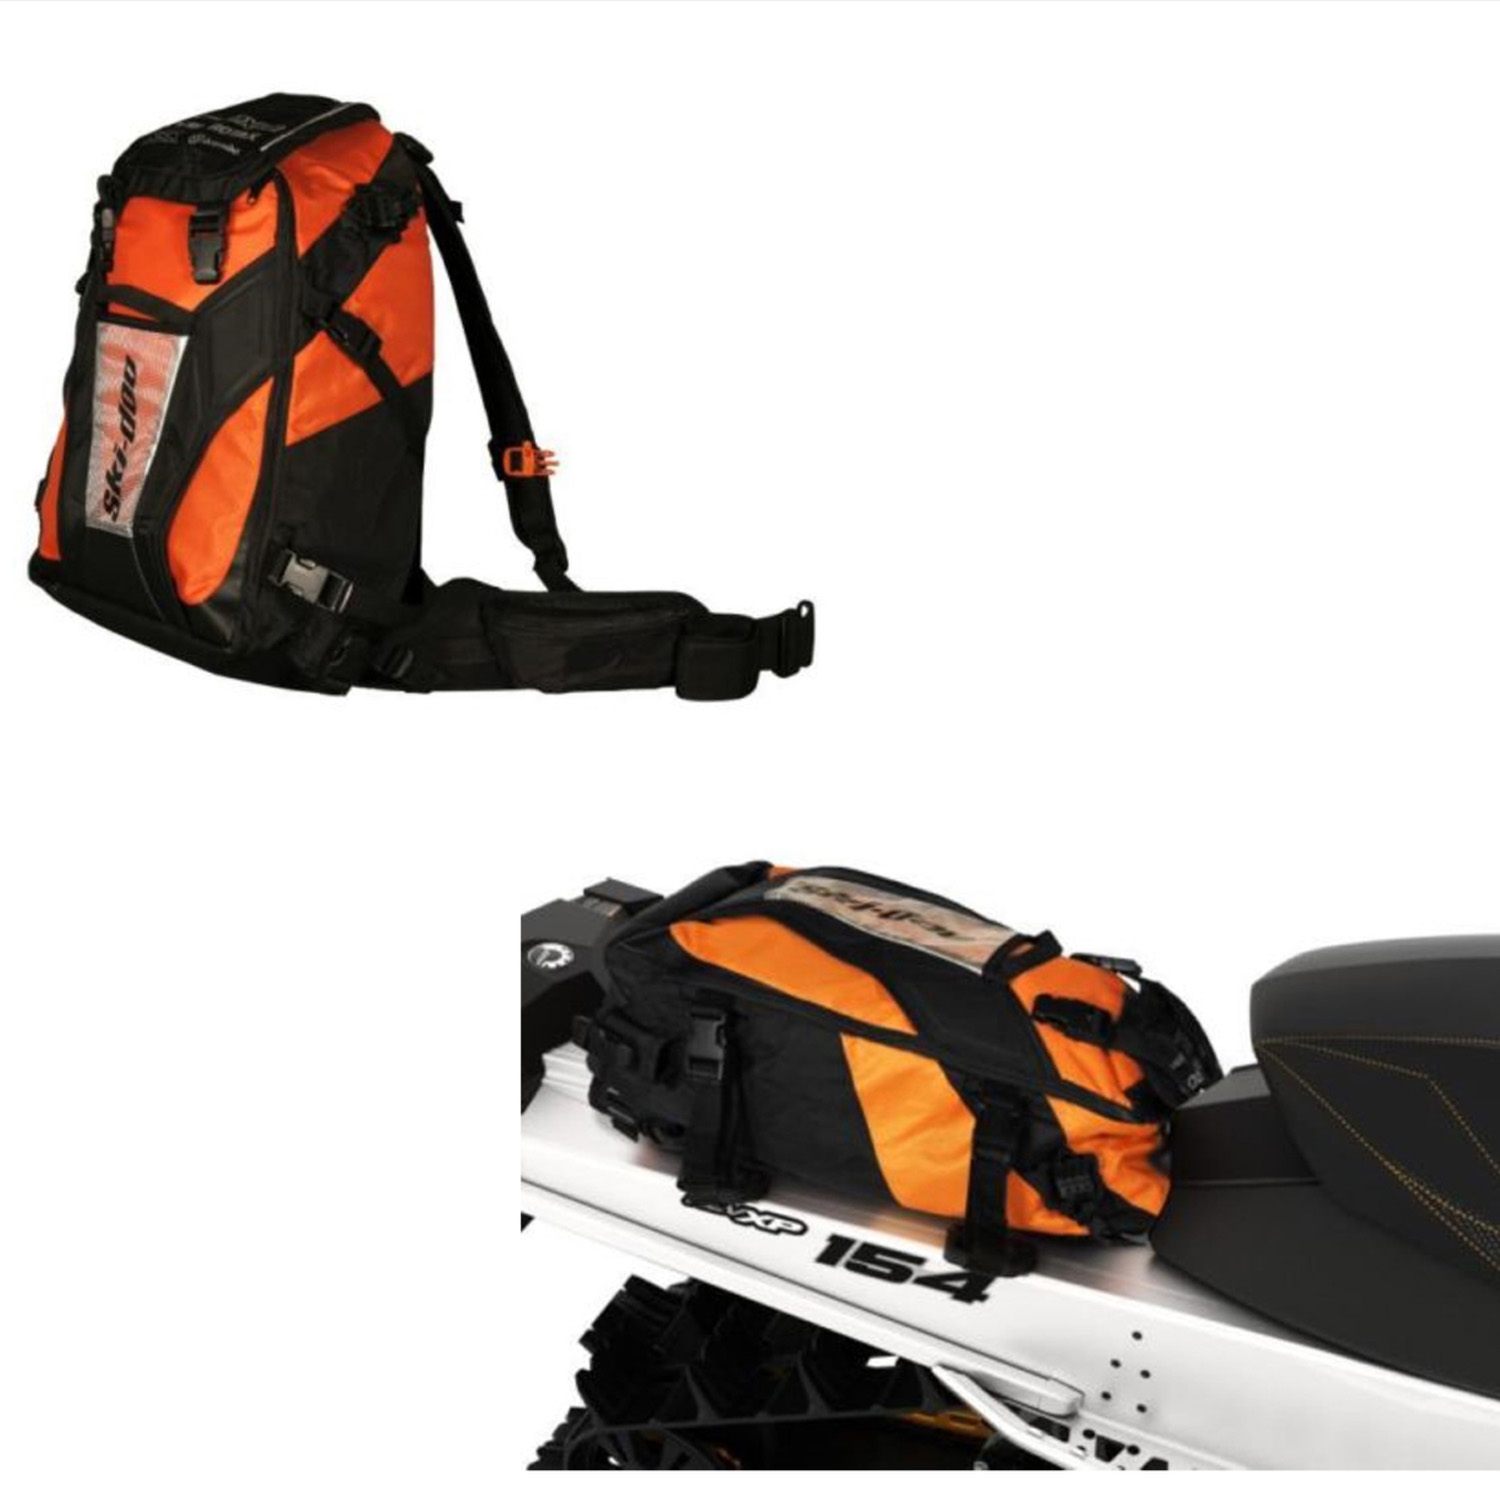 Ski-Doo New OEM Branded 28 Liter Tunnel Backpack With LinQ Soft Strap, 860200940 - image 3 of 3